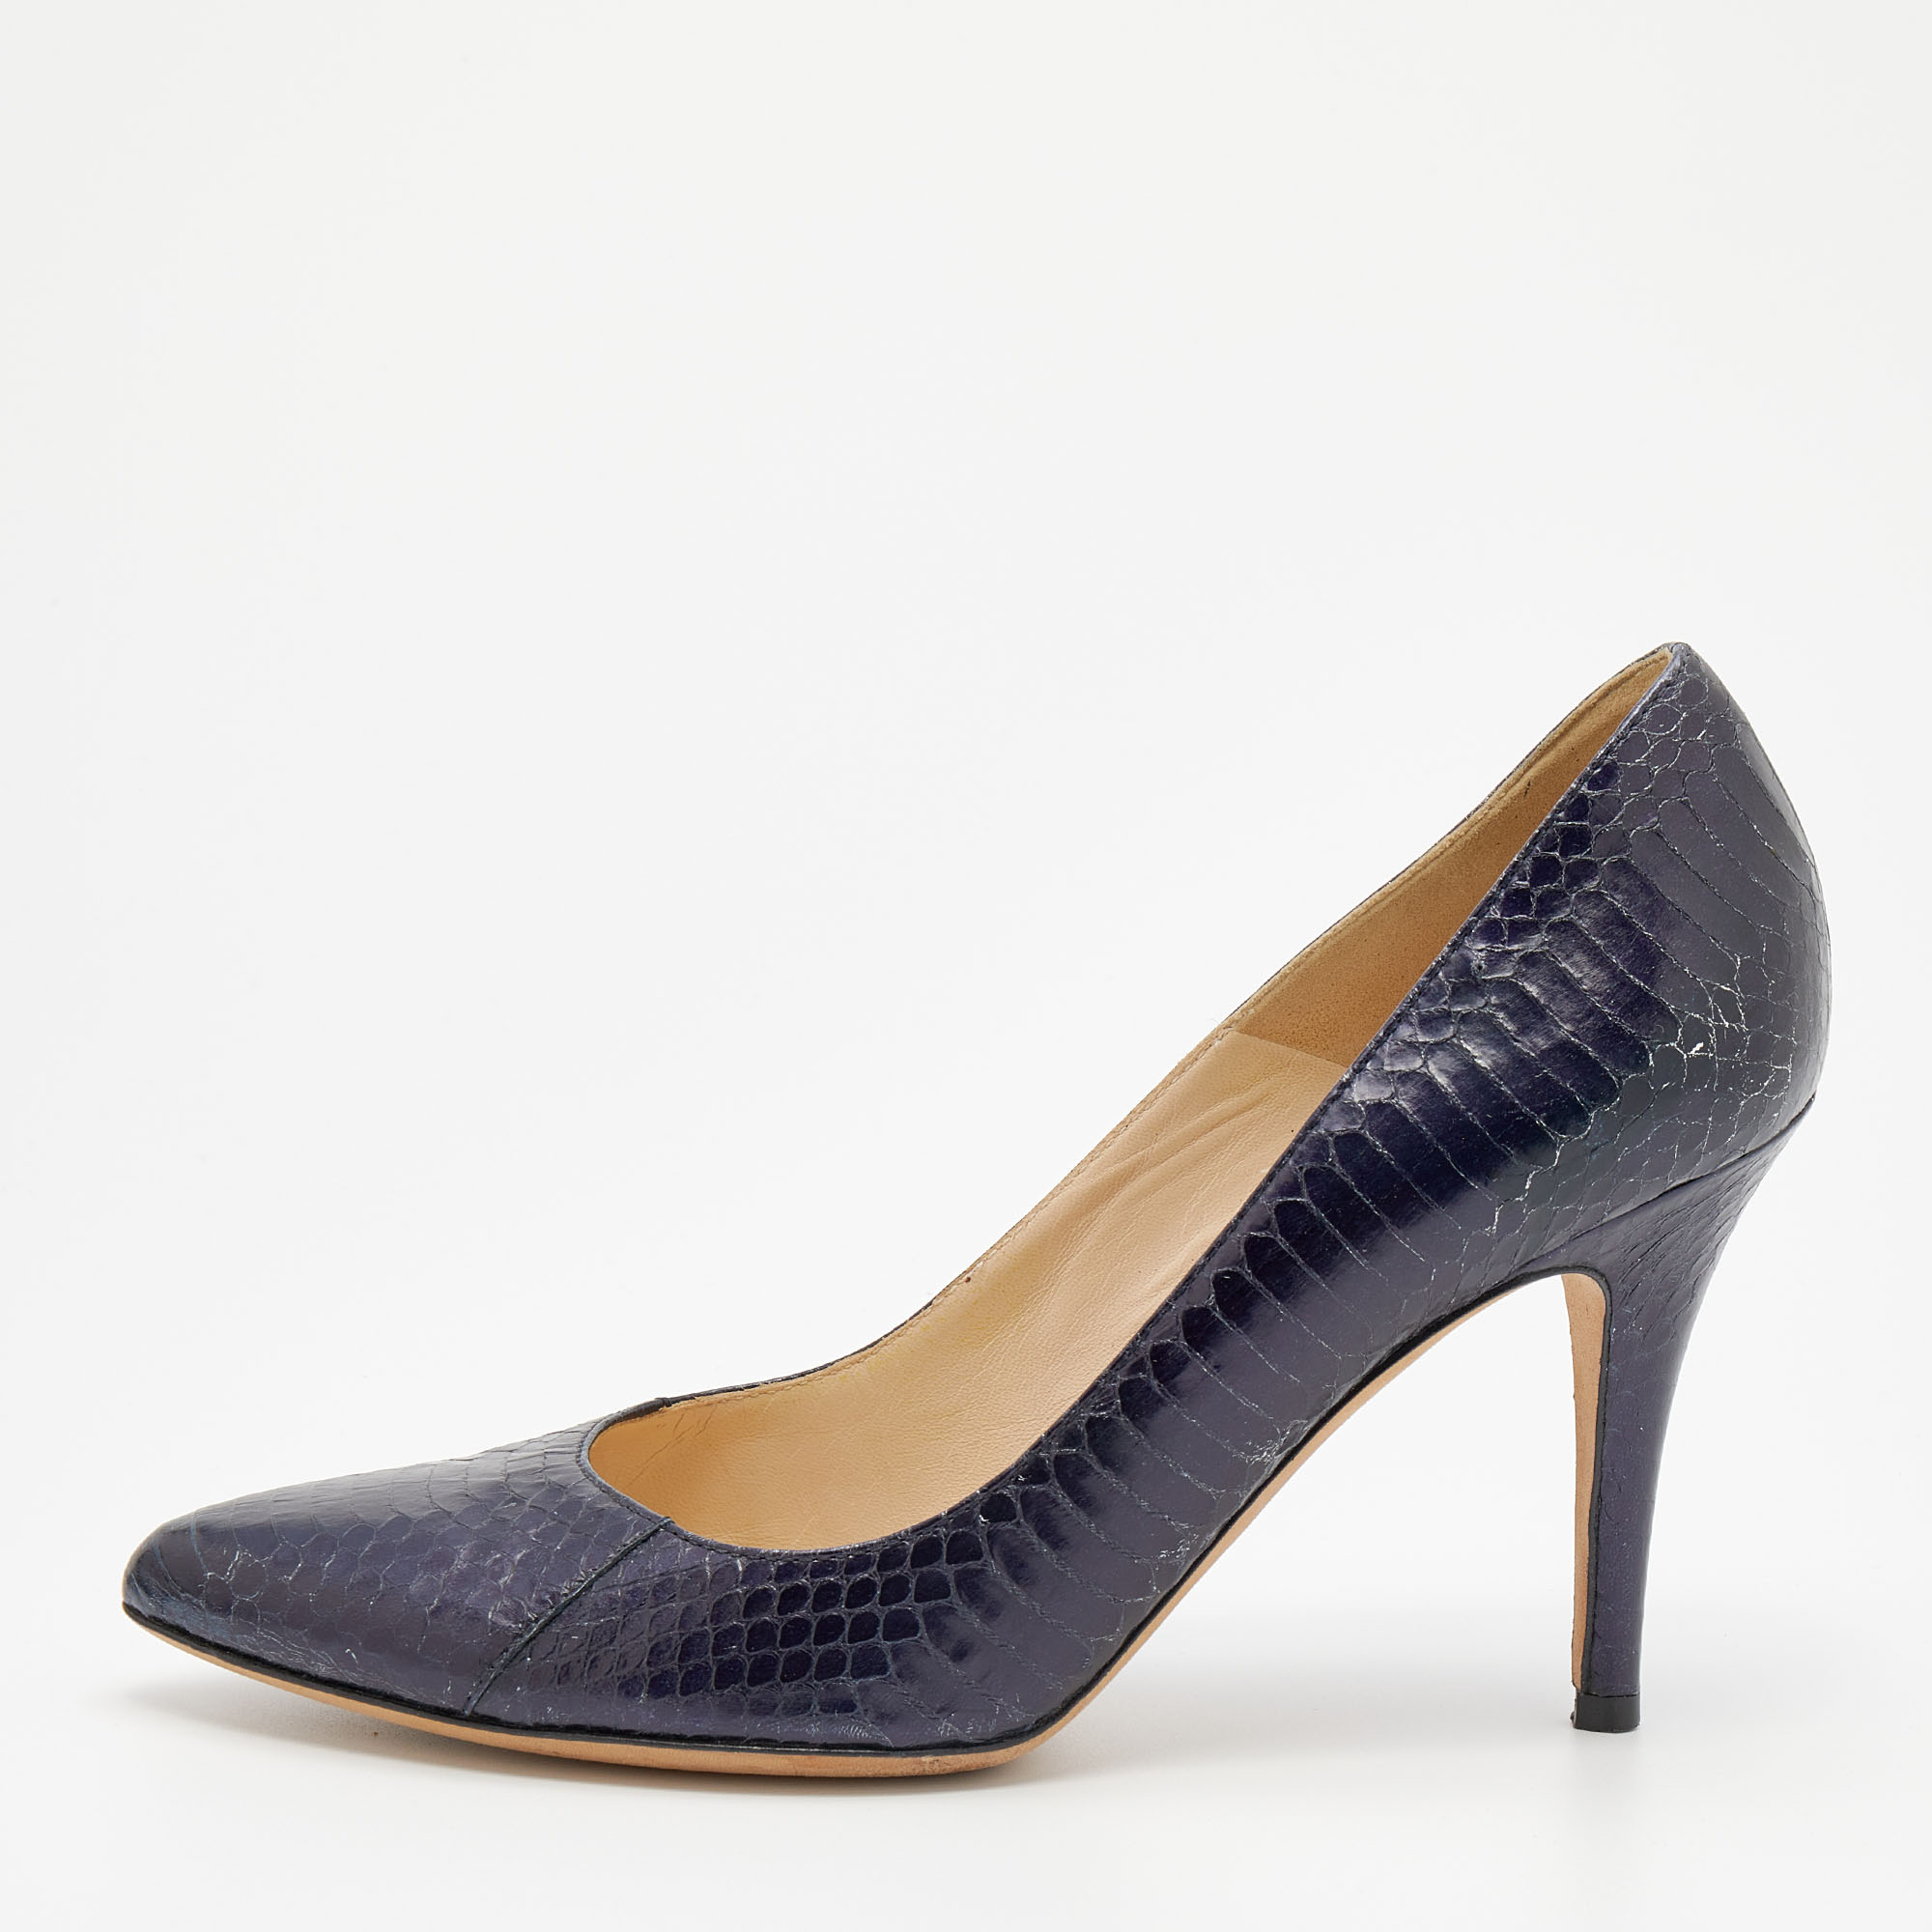 D&g blue snakeskin embossed leather pointed toe pumps size 38